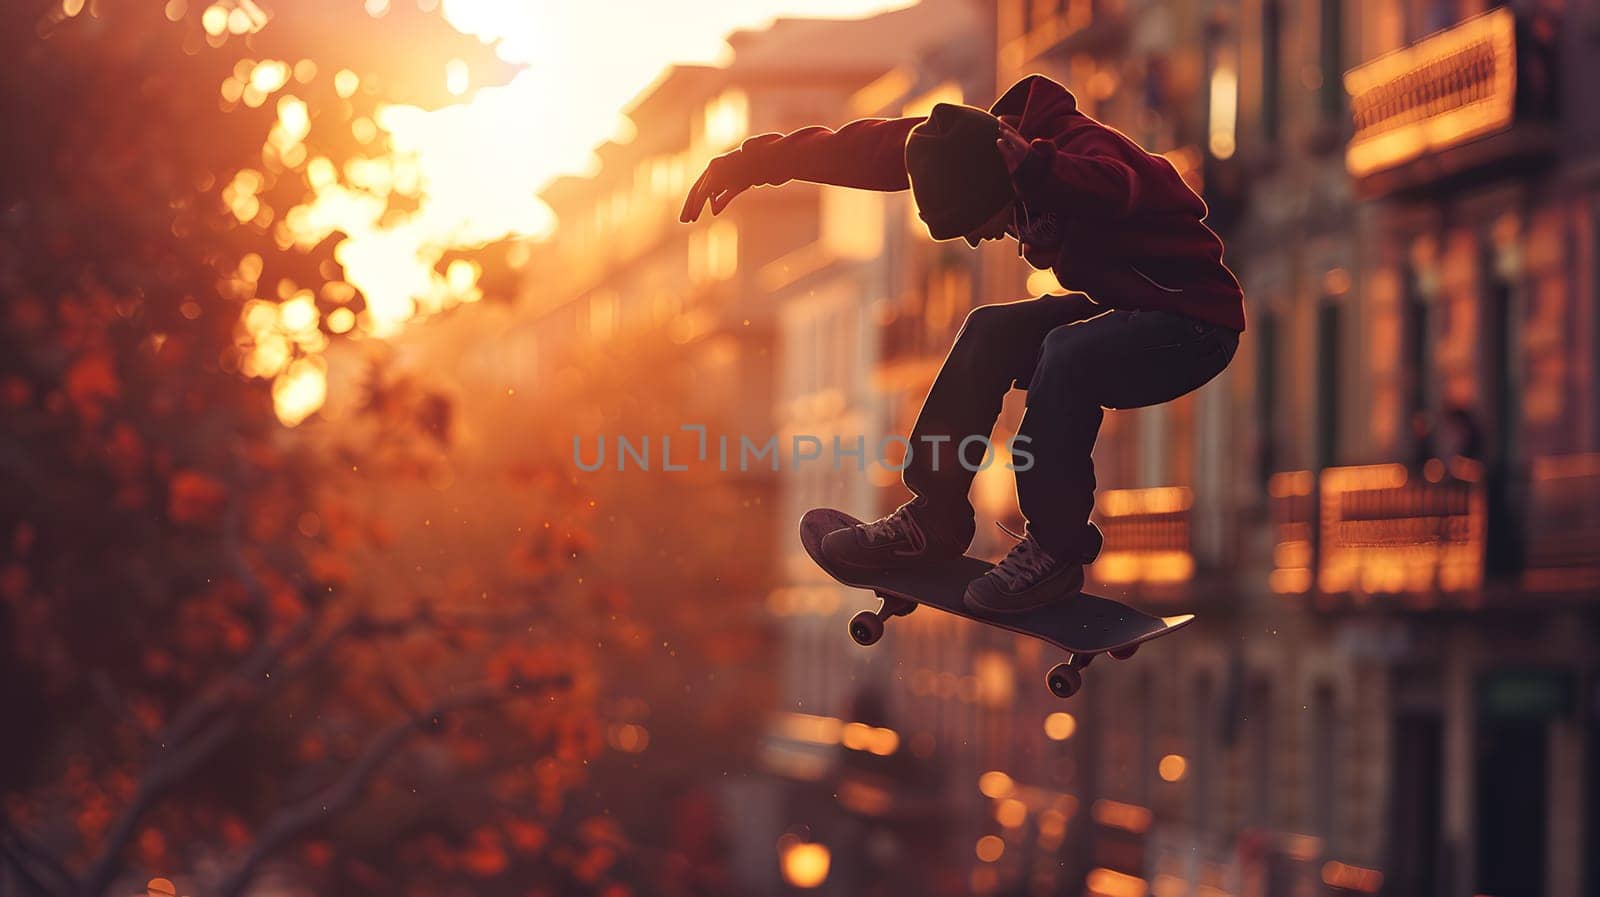 A skateboarder is performing a stunt in the morning sky, rolling through the atmosphere on a skateboard. Nearby trees add to the dynamic scene